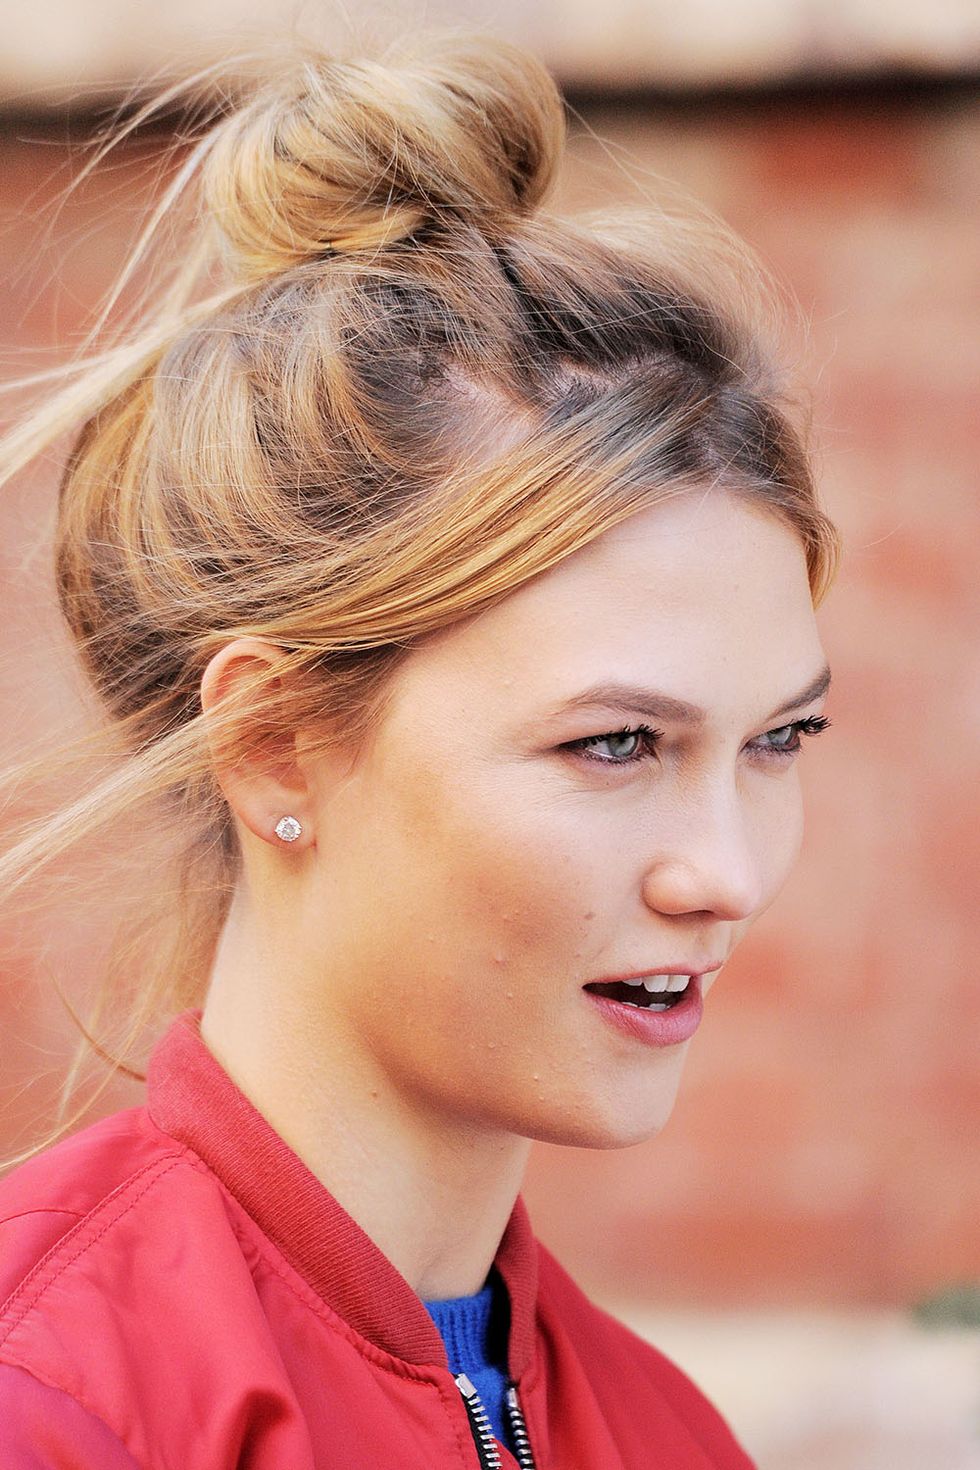 <p>Karlie Kloss hits the street with a chic toffee-colored top knot.&nbsp;<span class="redactor-invisible-space" data-verified="redactor" data-redactor-tag="span" data-redactor-class="redactor-invisible-space"></span></p>